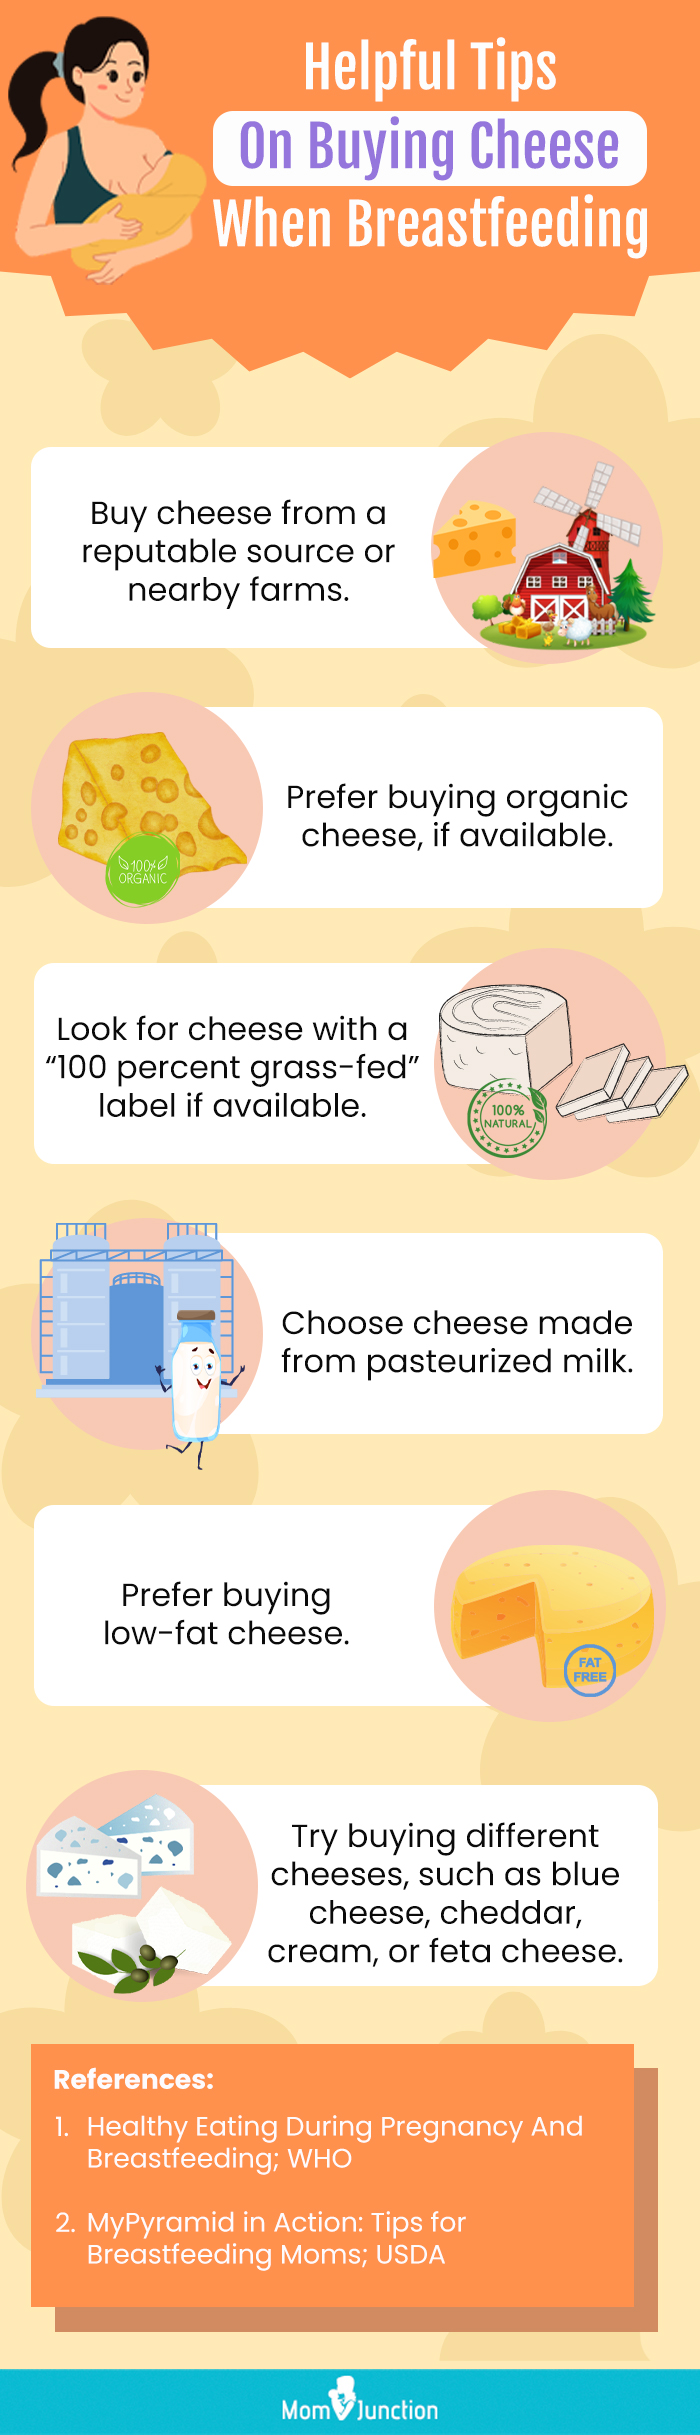 helpful tips on buying cheese when breastfeeding (infographic)